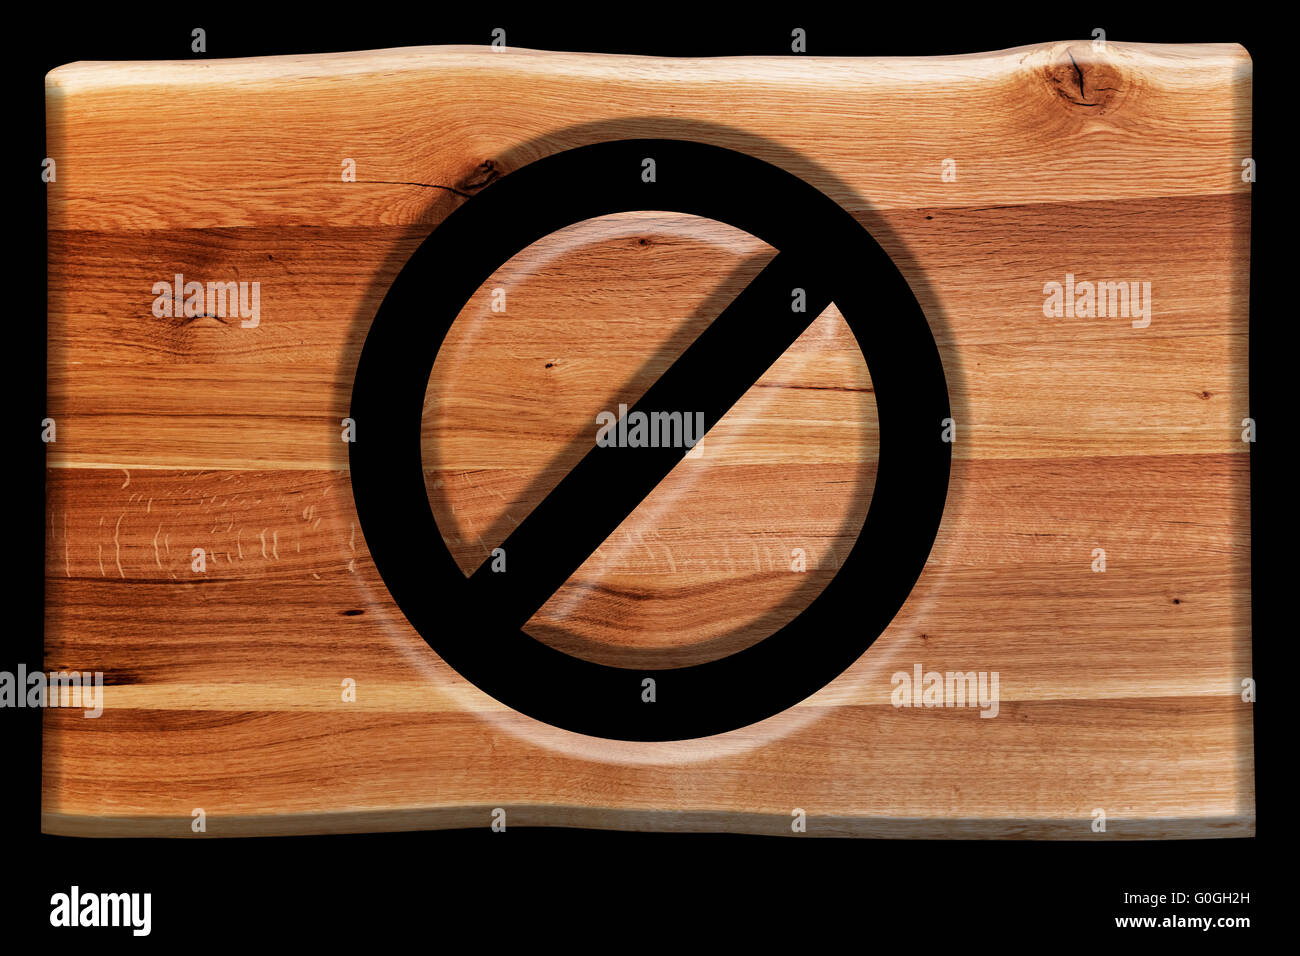 Prohibition, ban or closed symbol cut in wooden board isolated on black Stock Photo